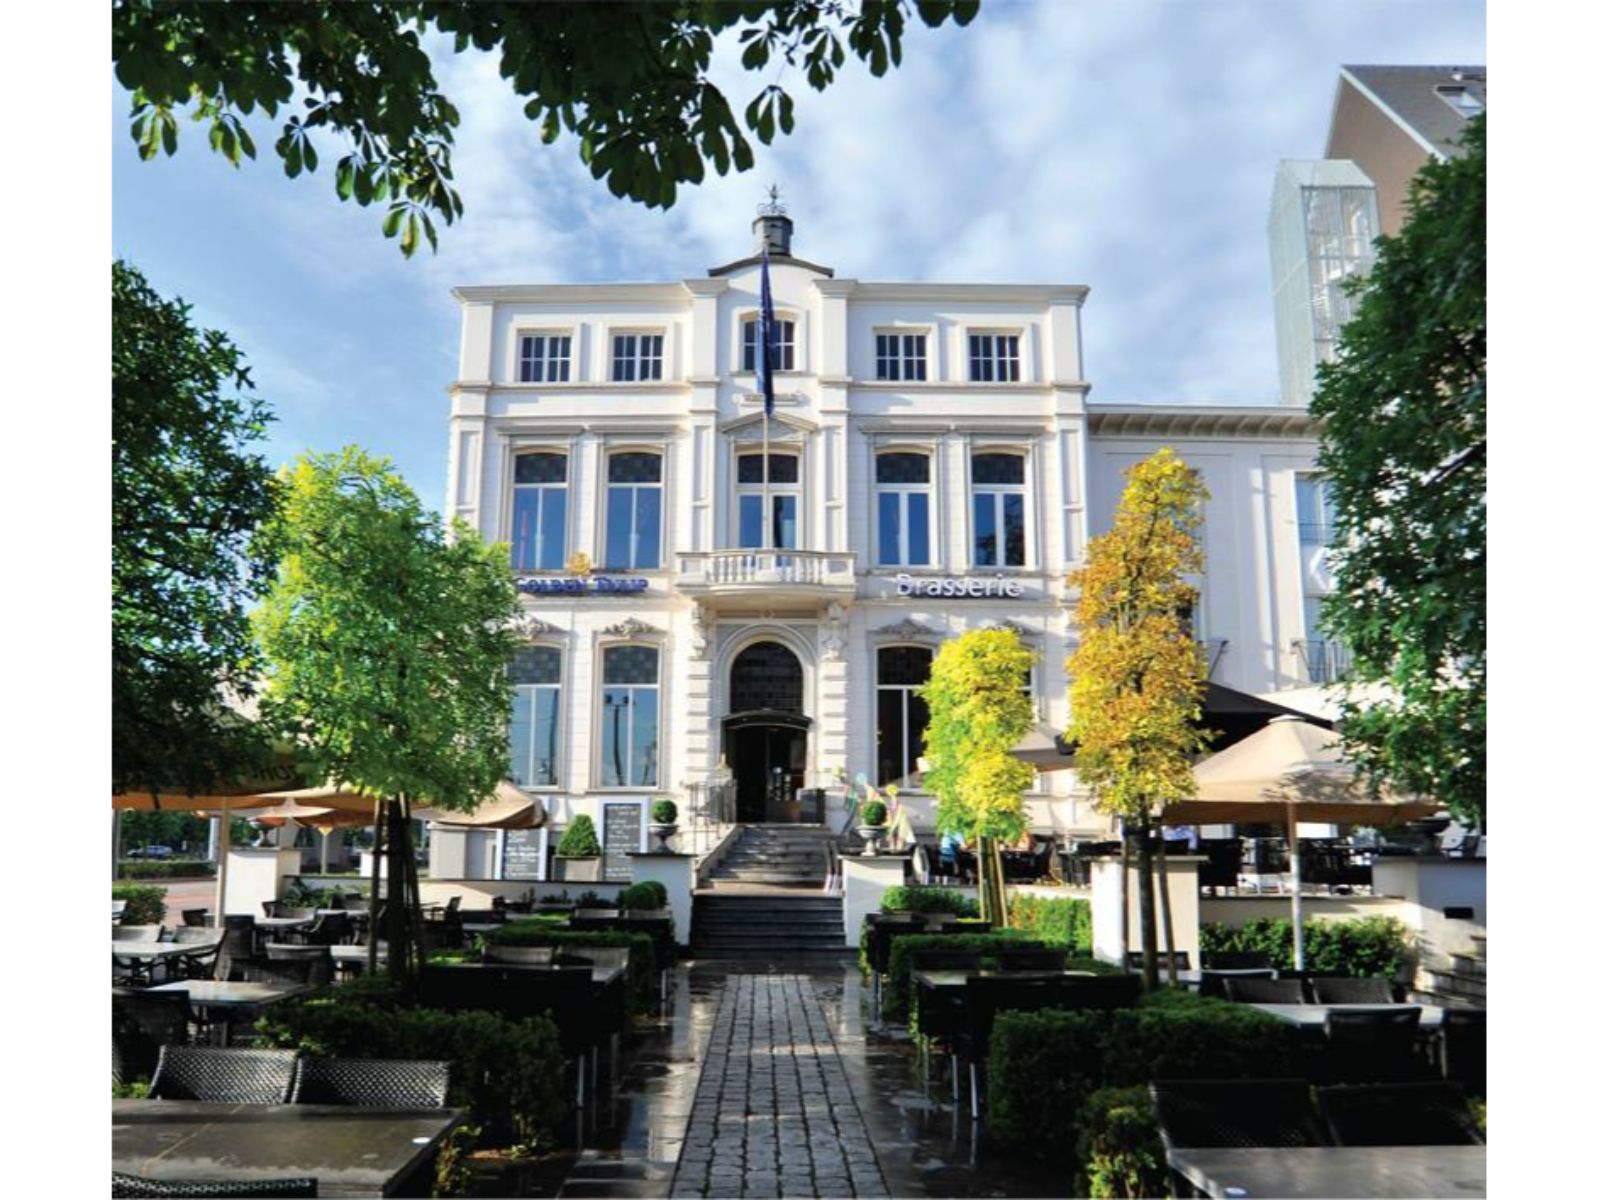 Golden Tulip Hotel West-Ende <br/>77.40 ew <br/> <a href='http://vakantieoplossing.nl/outpage/?id=82f9a7a2665ab7abe1d4c6c3eeeba80d' target='_blank'>View Details</a>